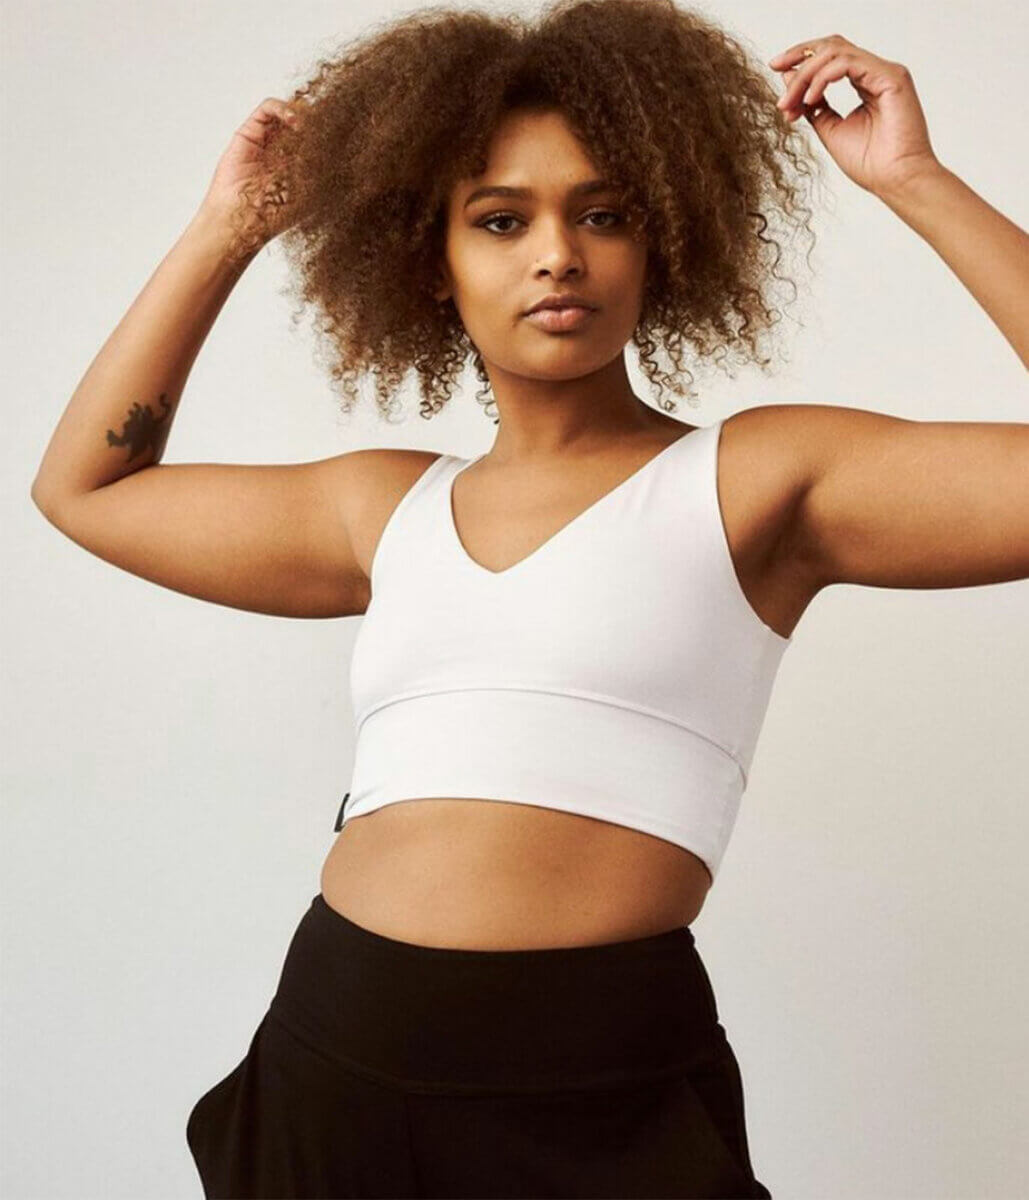 Celebrating ethical Canadian brands like Free Label, and a model is showing the White Andie Bra